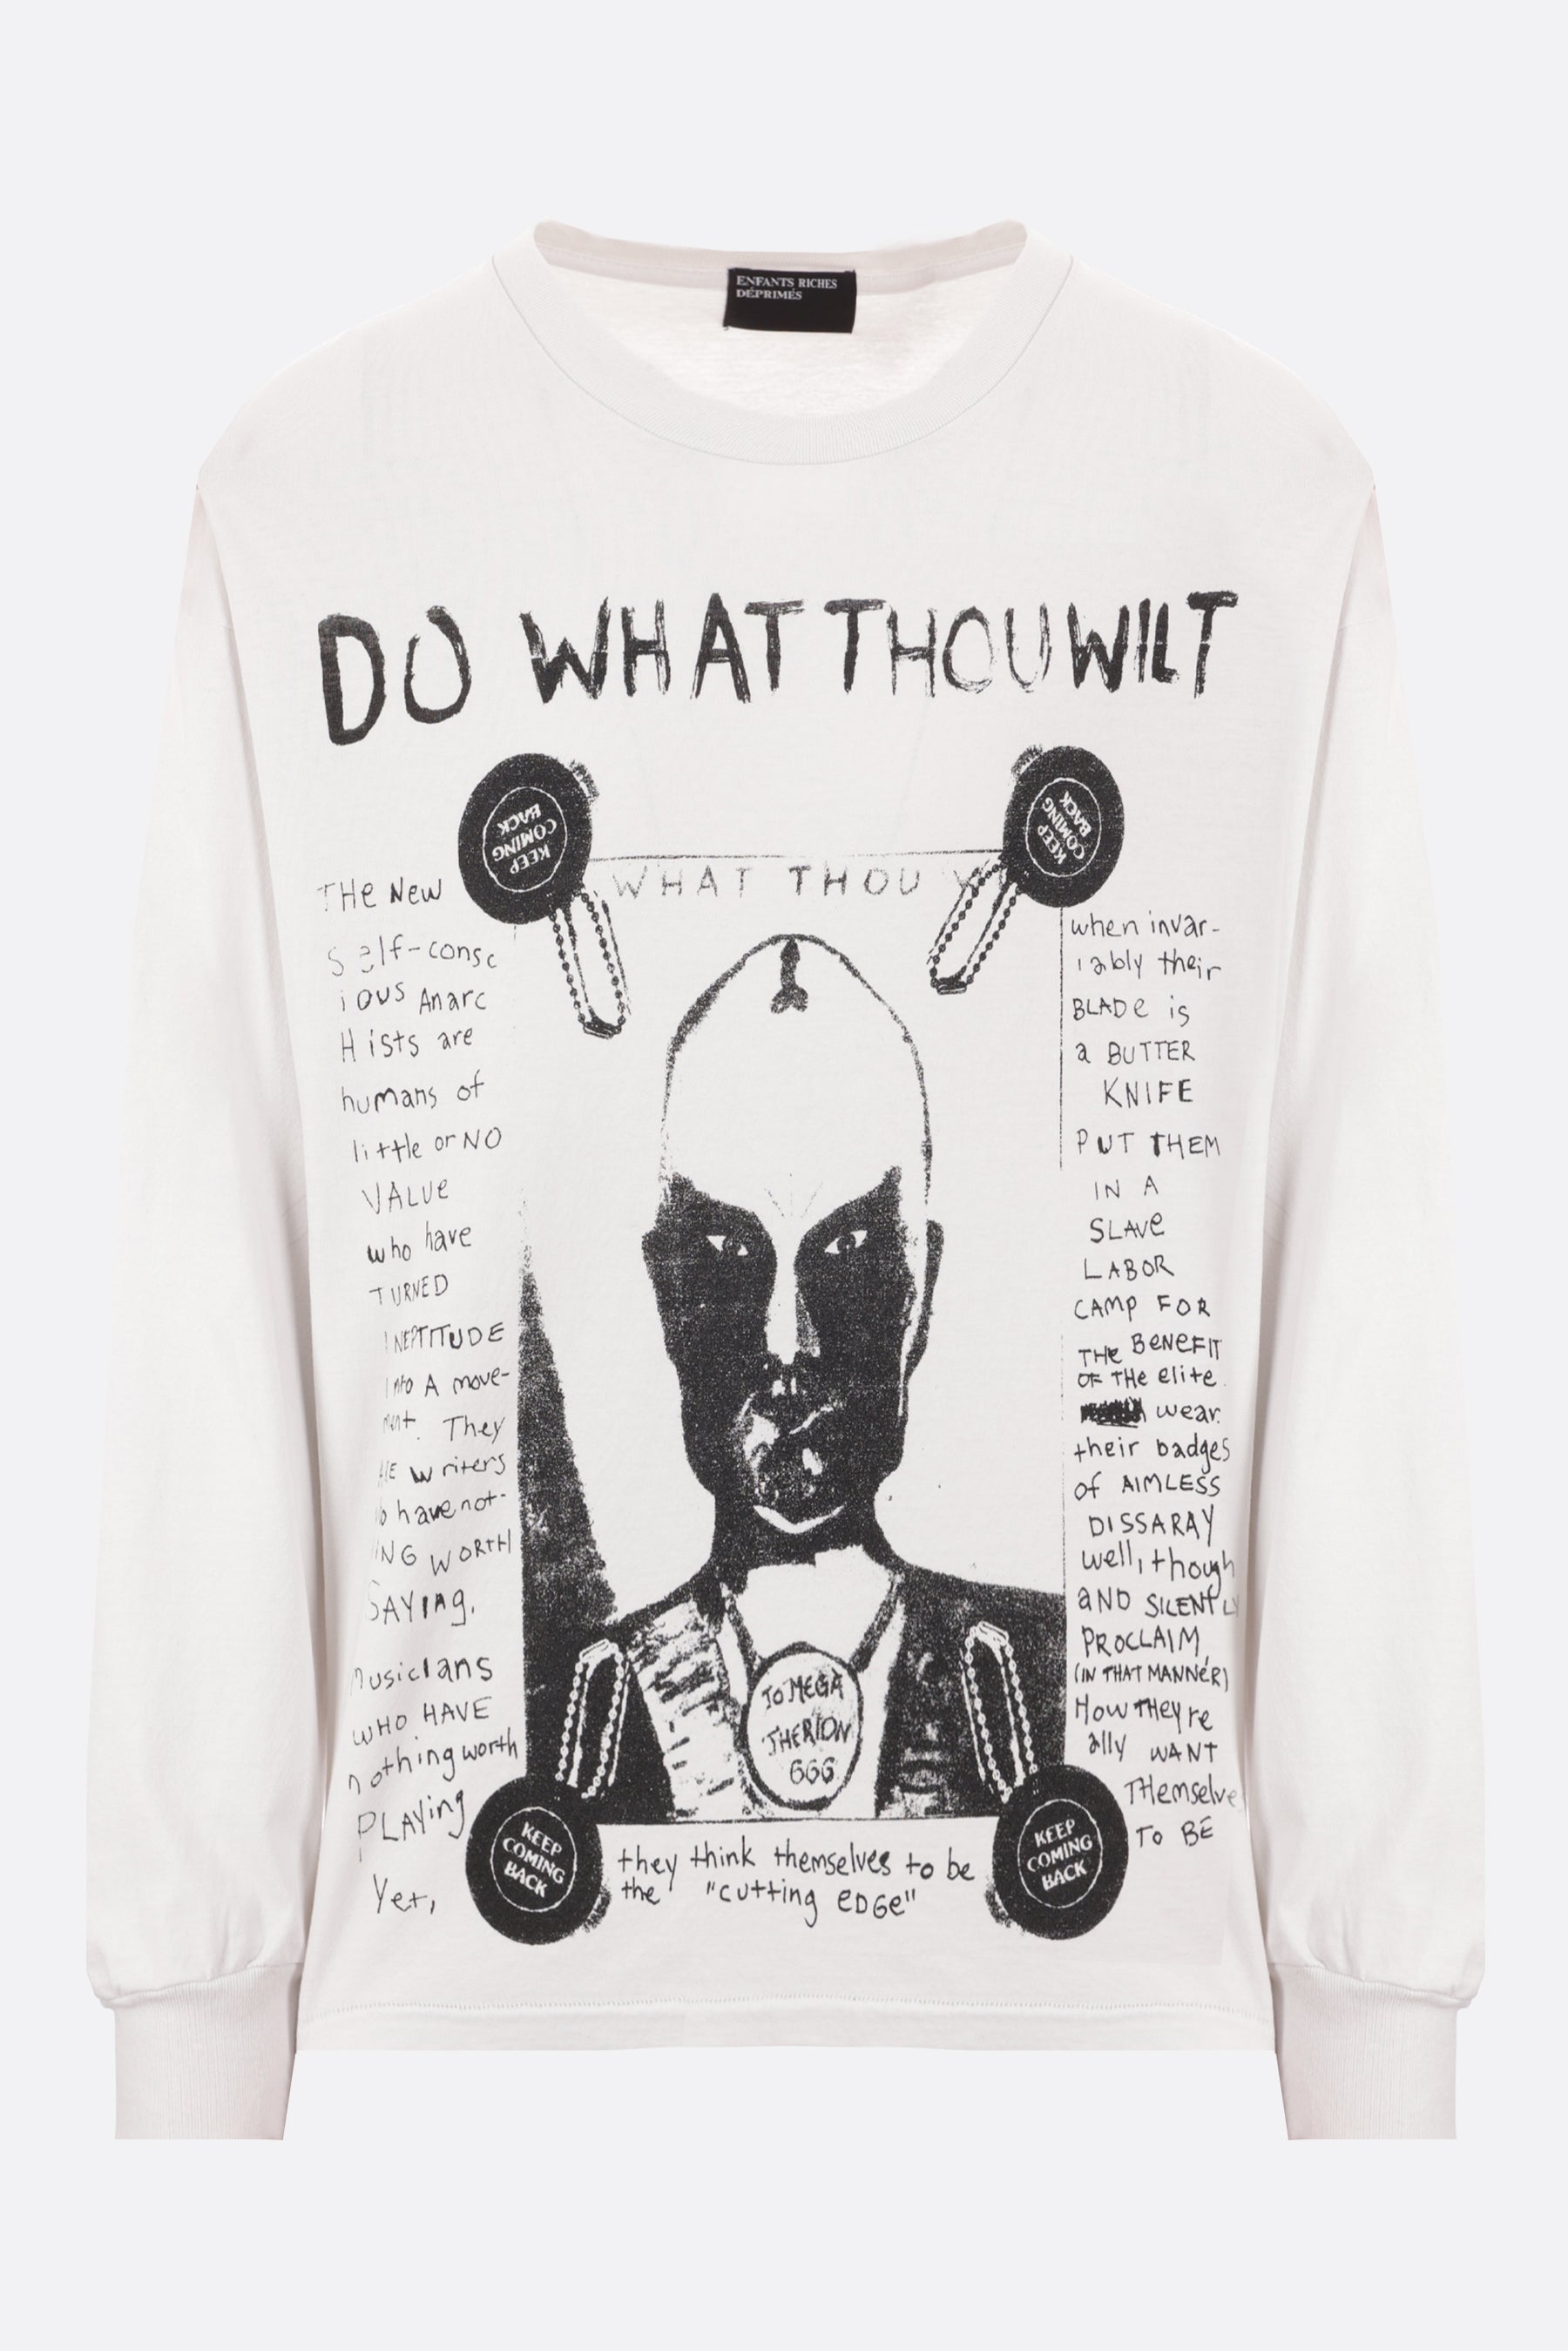 Do What Thou Wilt cotton long-sleeved t-shirt